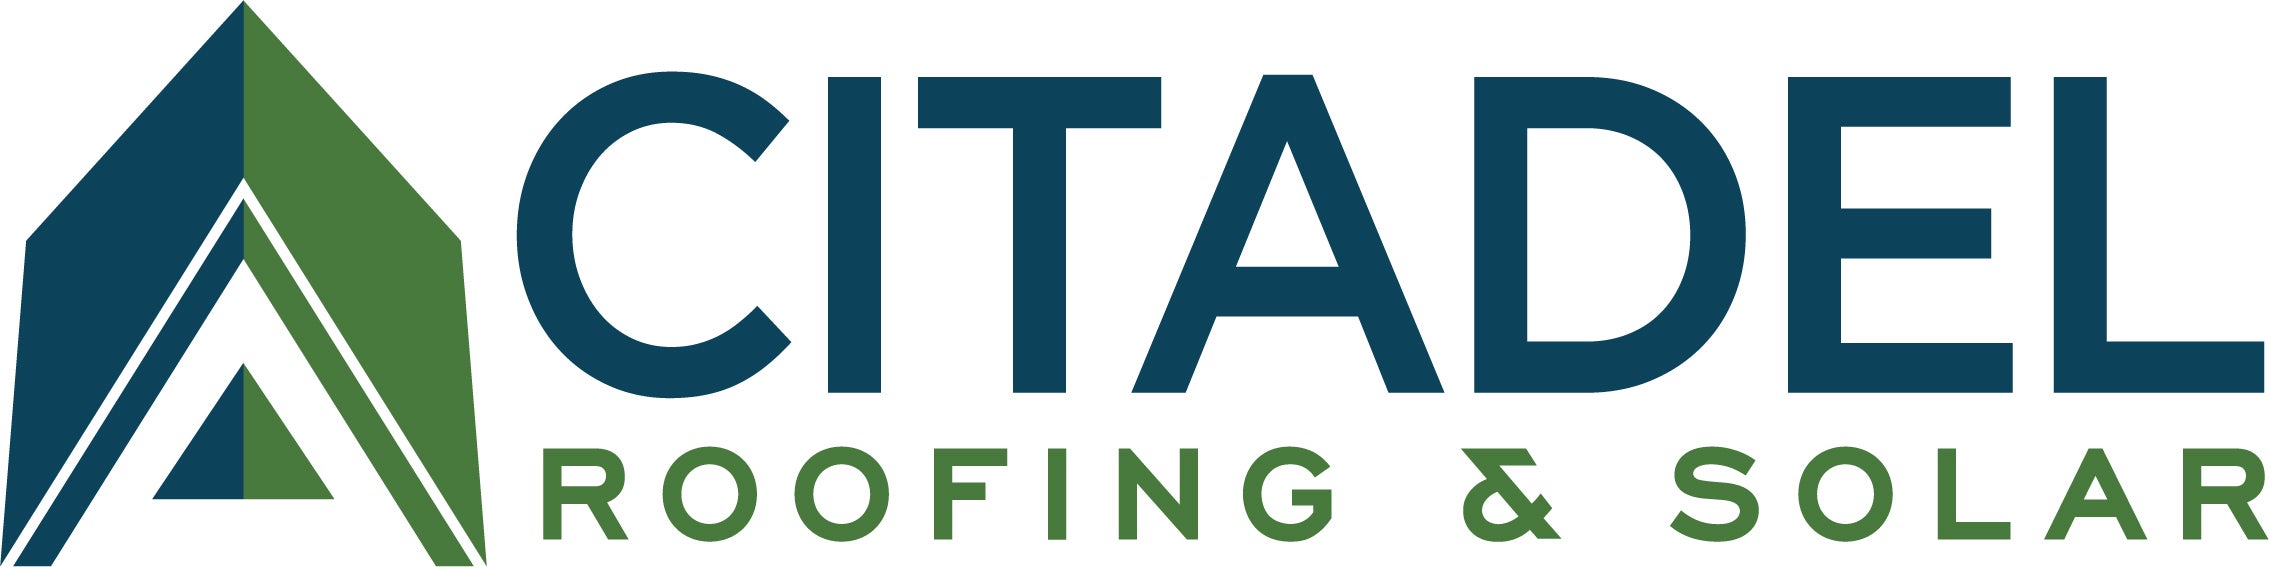 Citadel Roofing and Solar logo